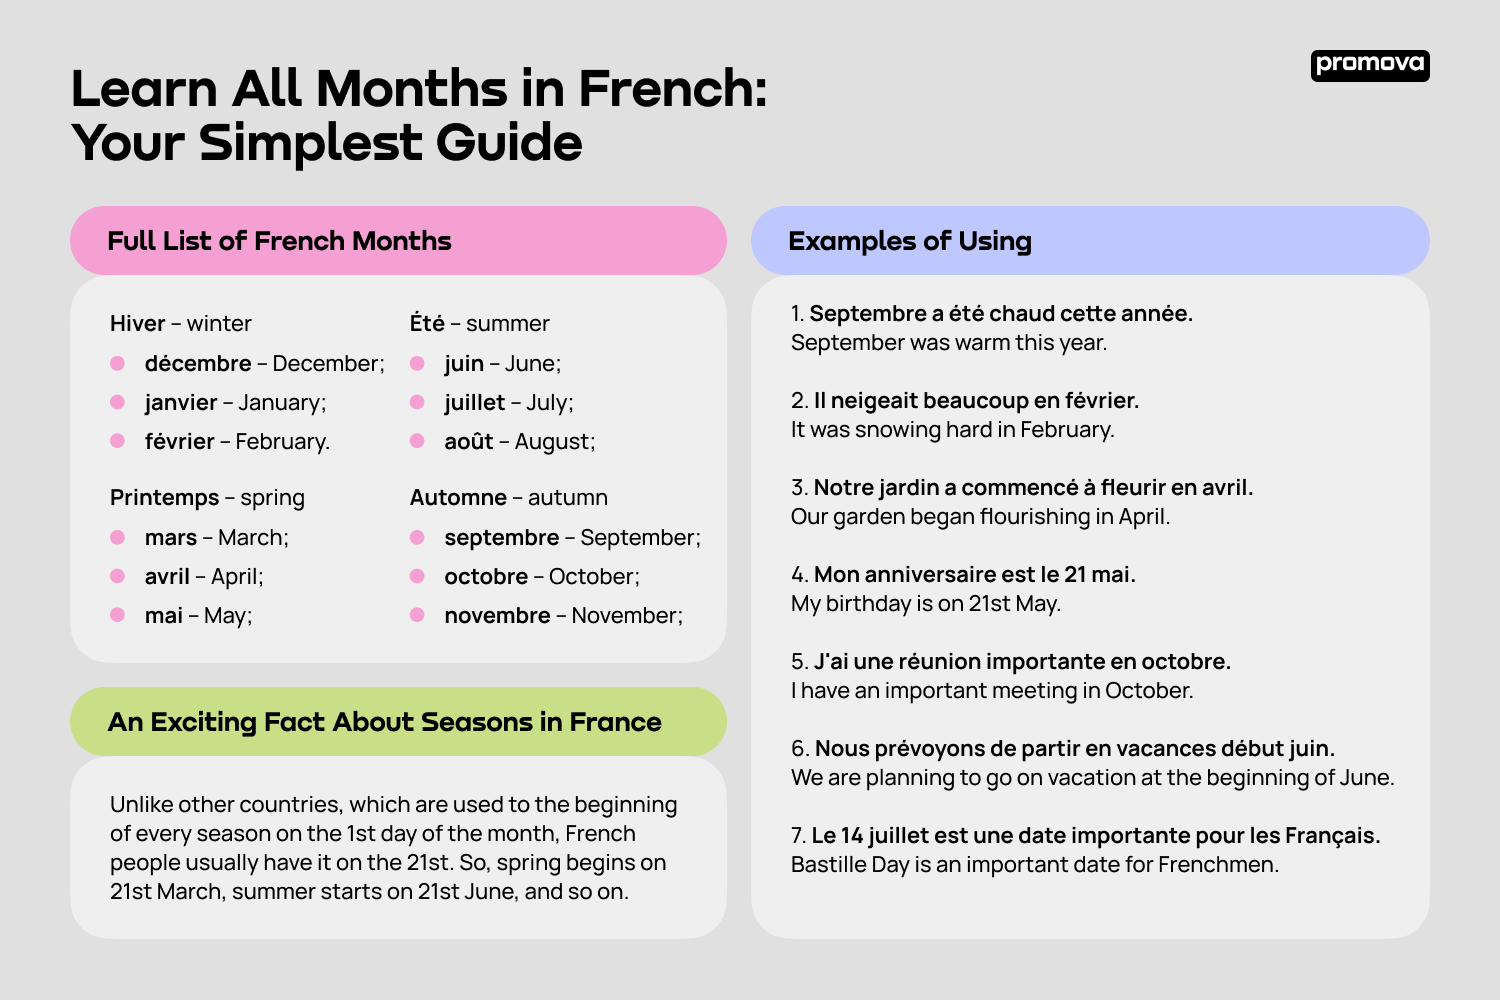 Learning All Months in French and Useful Examples